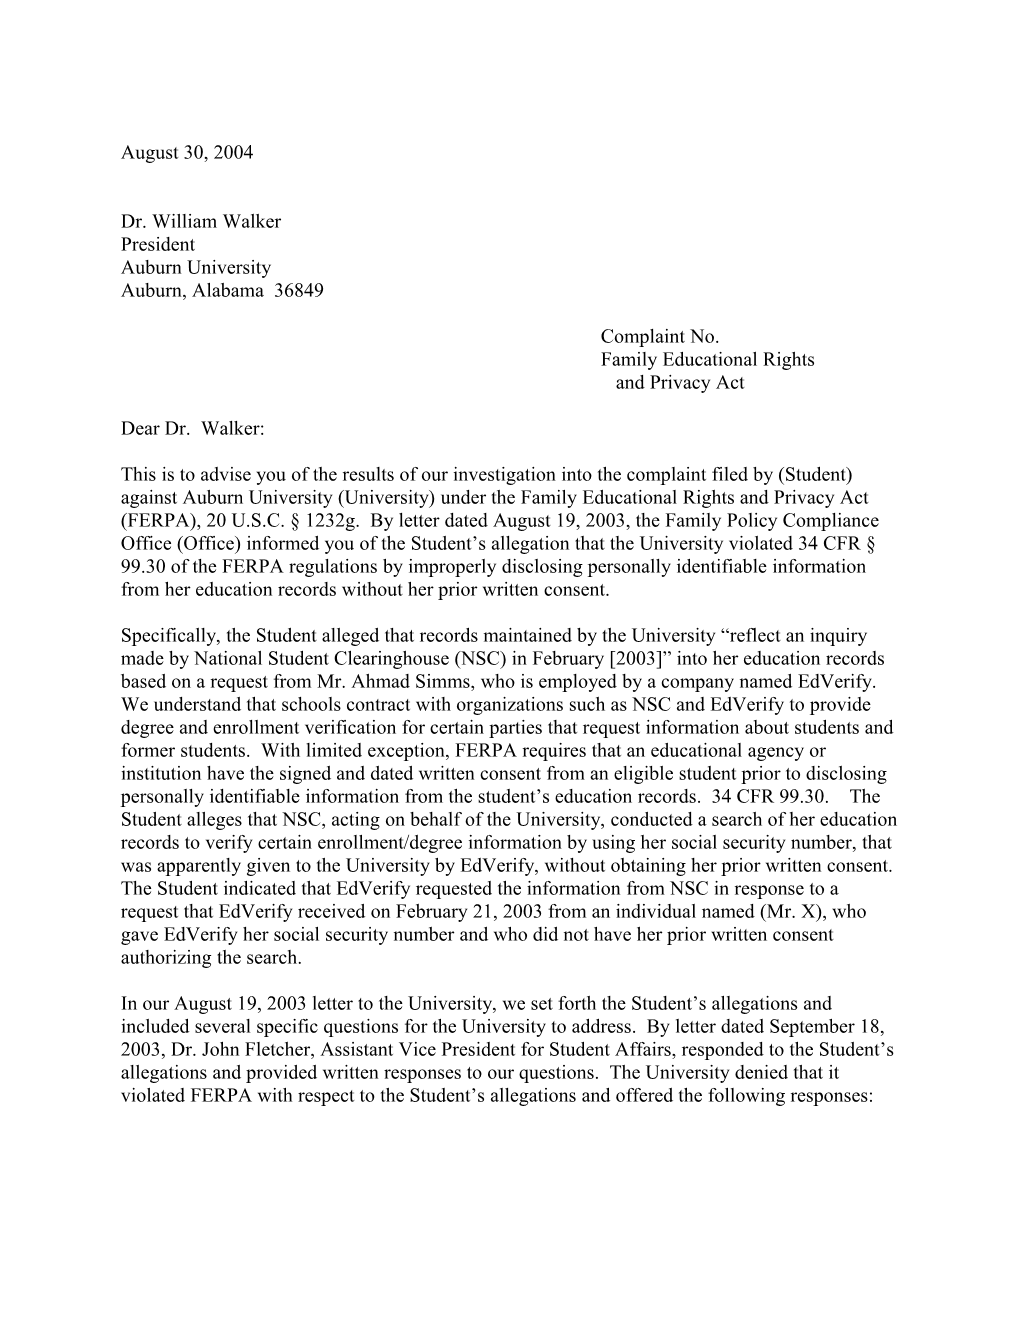 Letter to Auburn University Re: National Student Clearinghouse (MS Word)